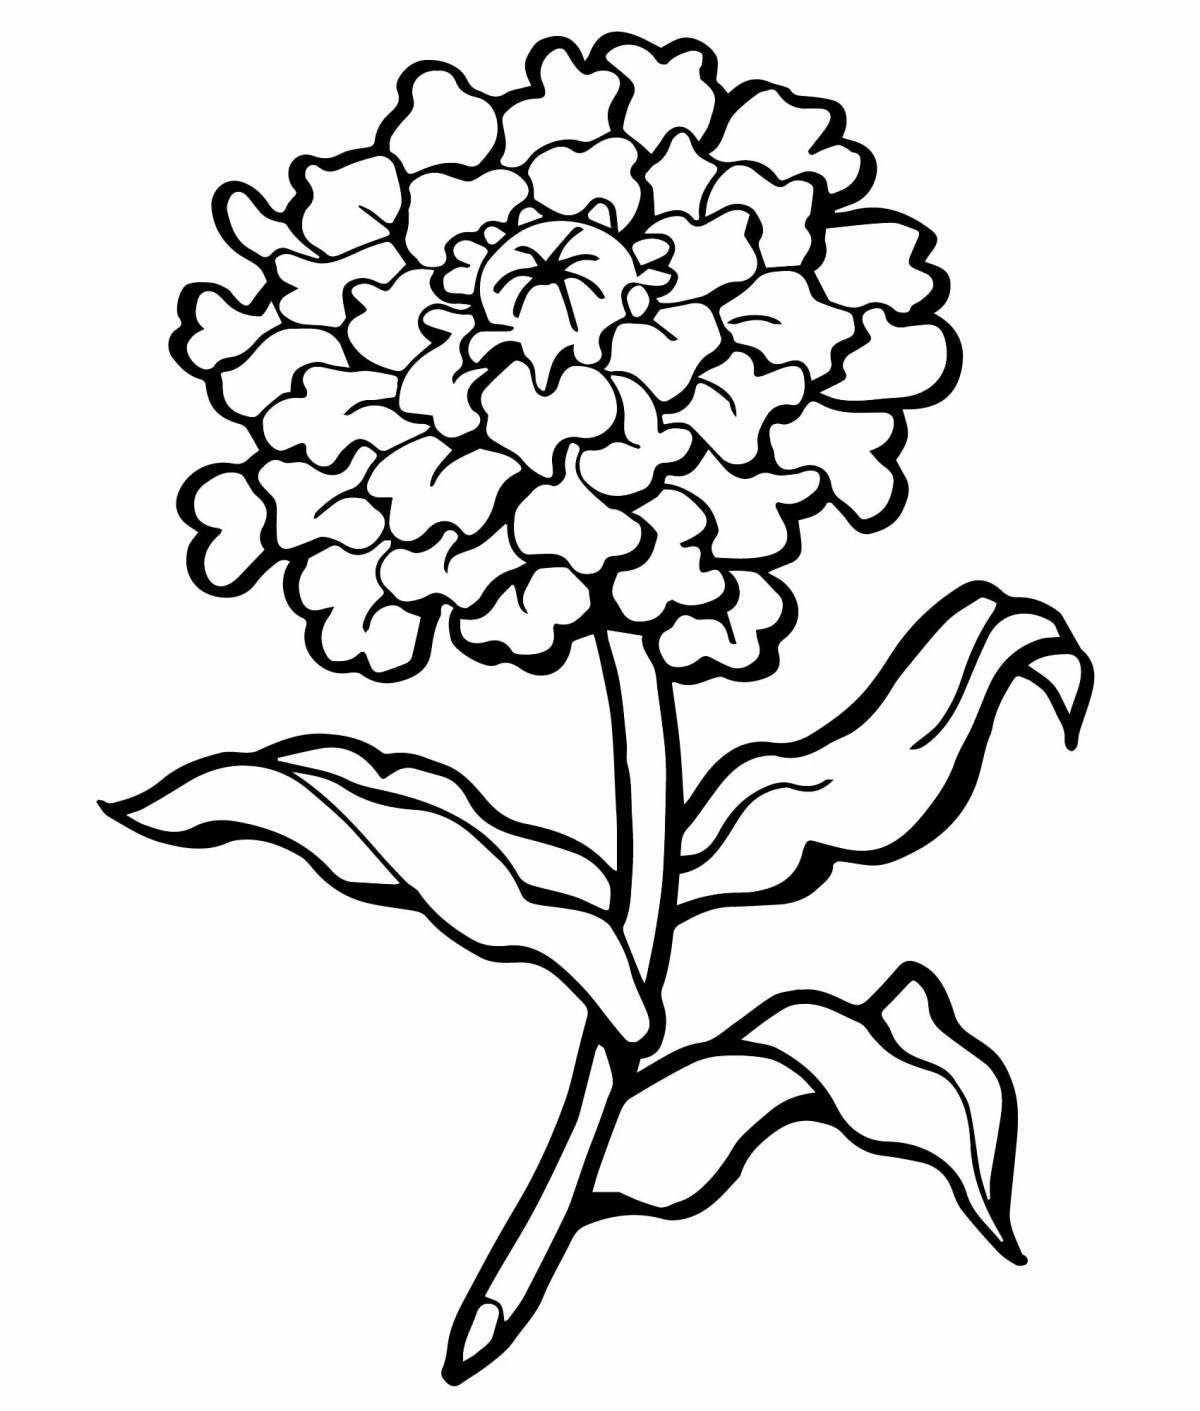 Glitter carnation coloring book for kids